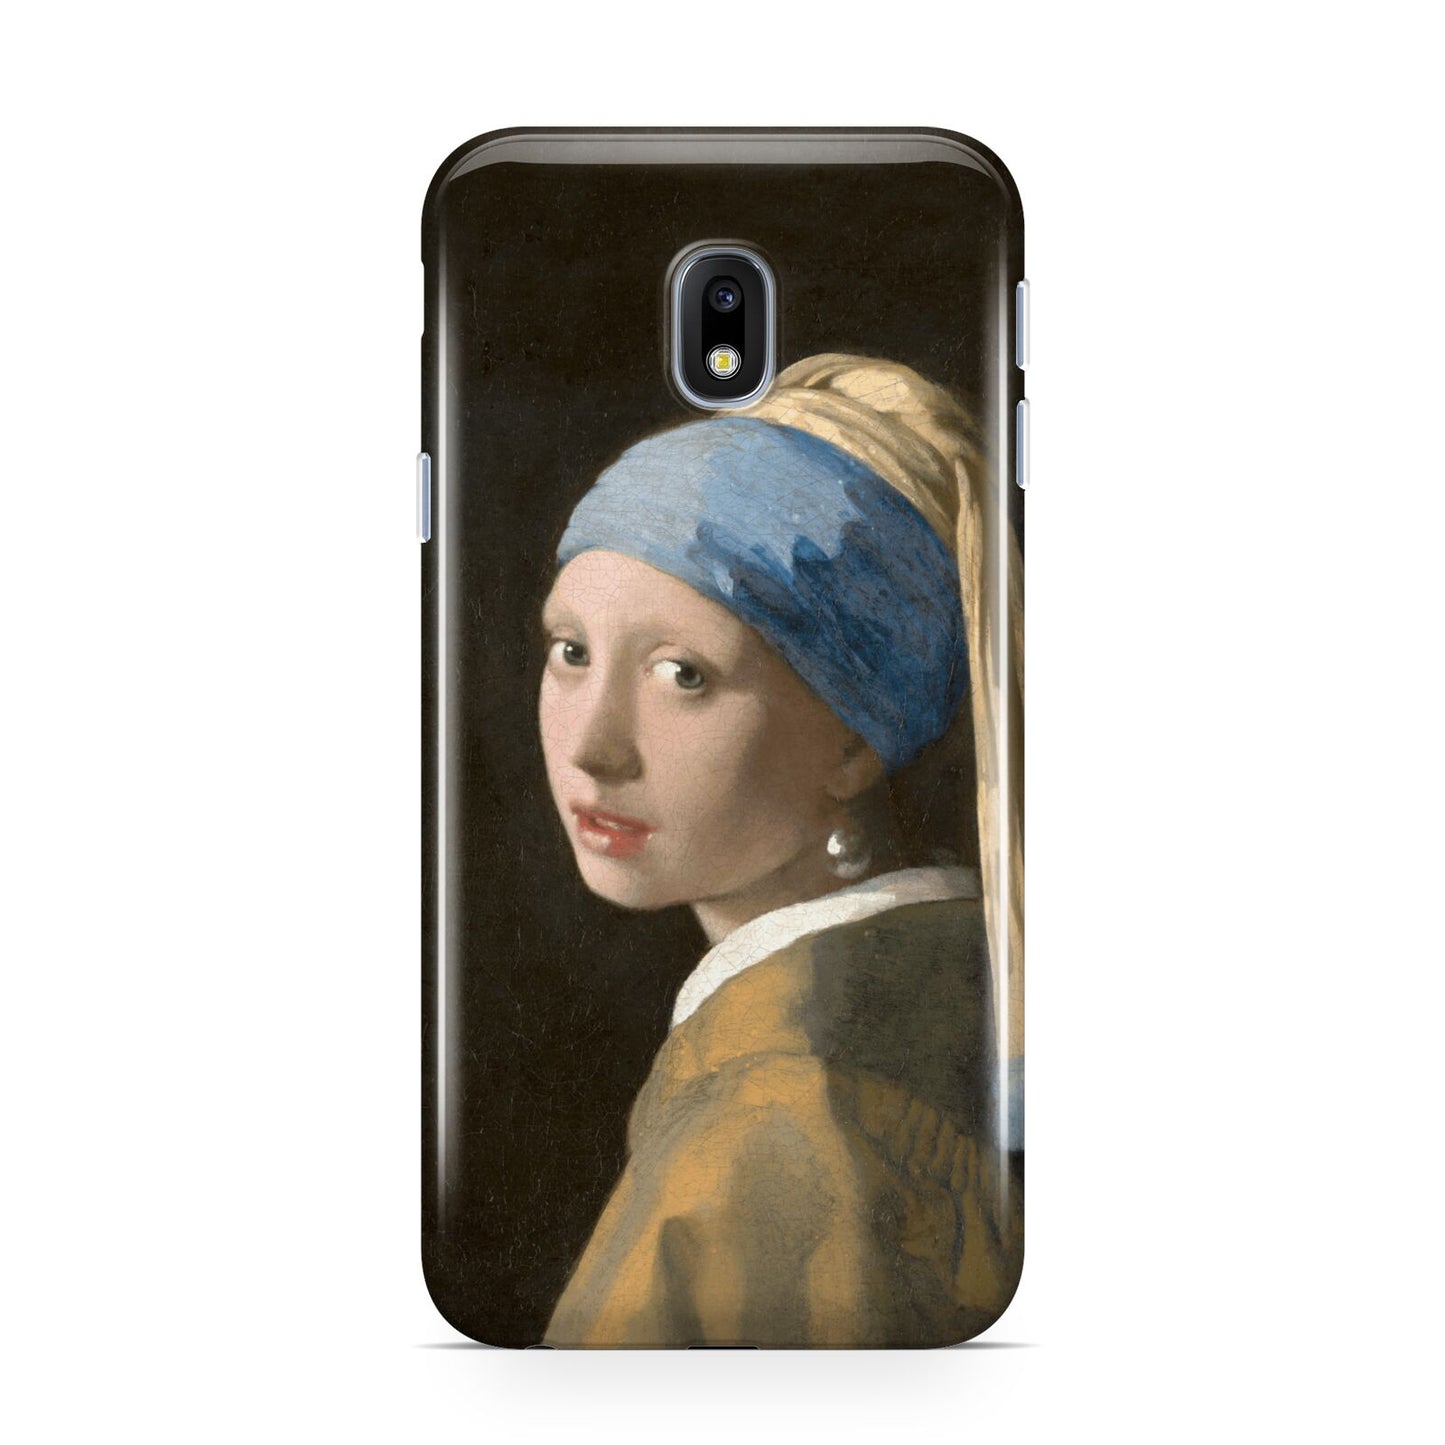 Girl With A Pearl Earring By Johannes Vermeer Samsung Galaxy J3 2017 Case